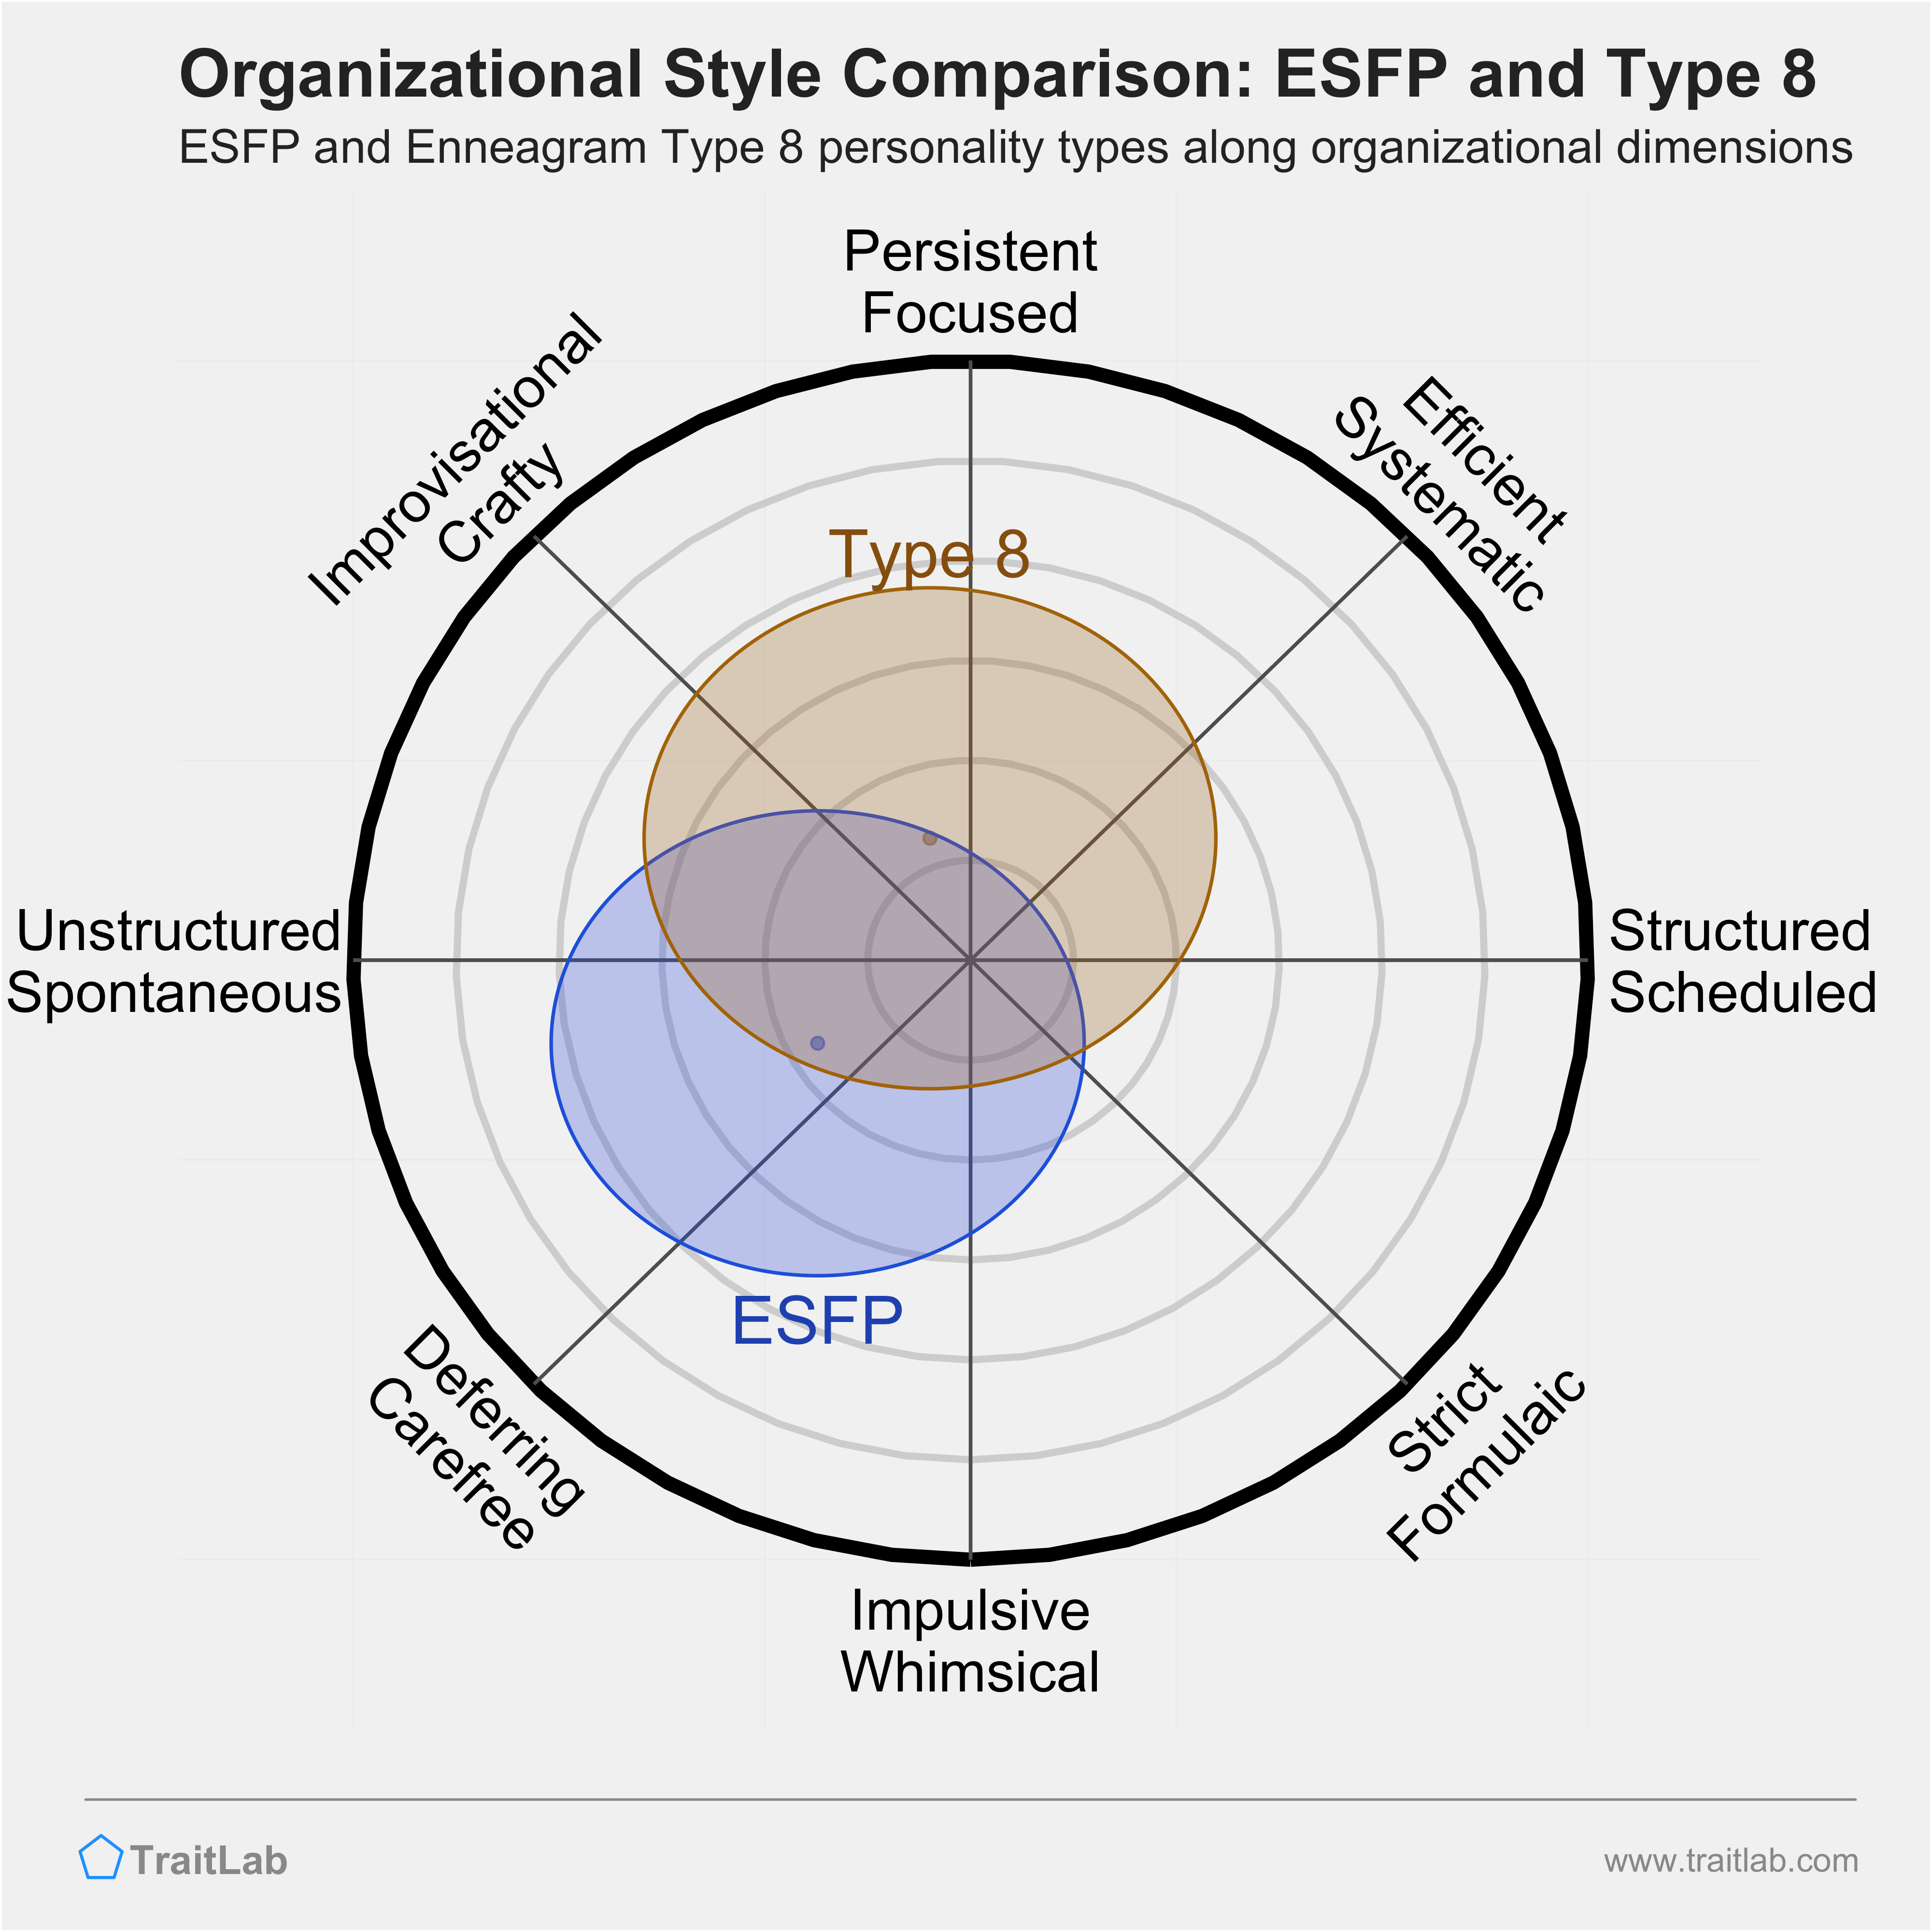 ESFP and Type 8 comparison across organizational dimensions